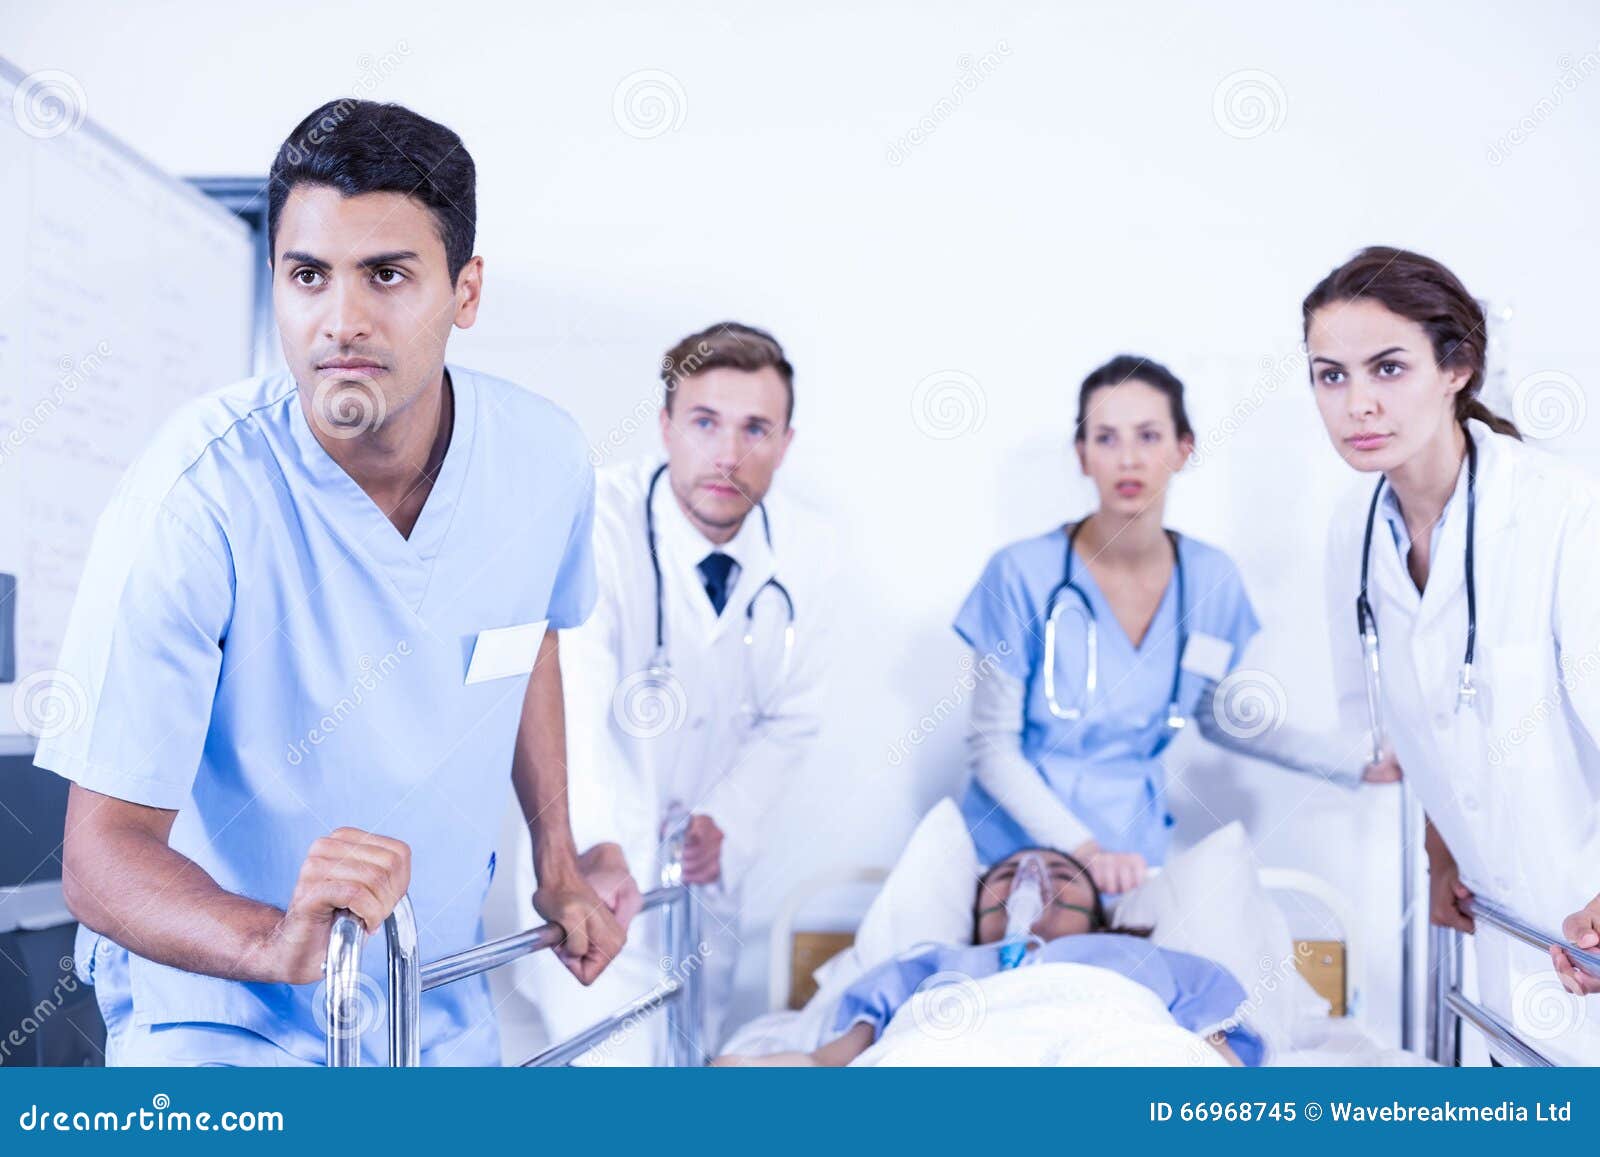 Concerned doctors standing near patient on bed in hospital